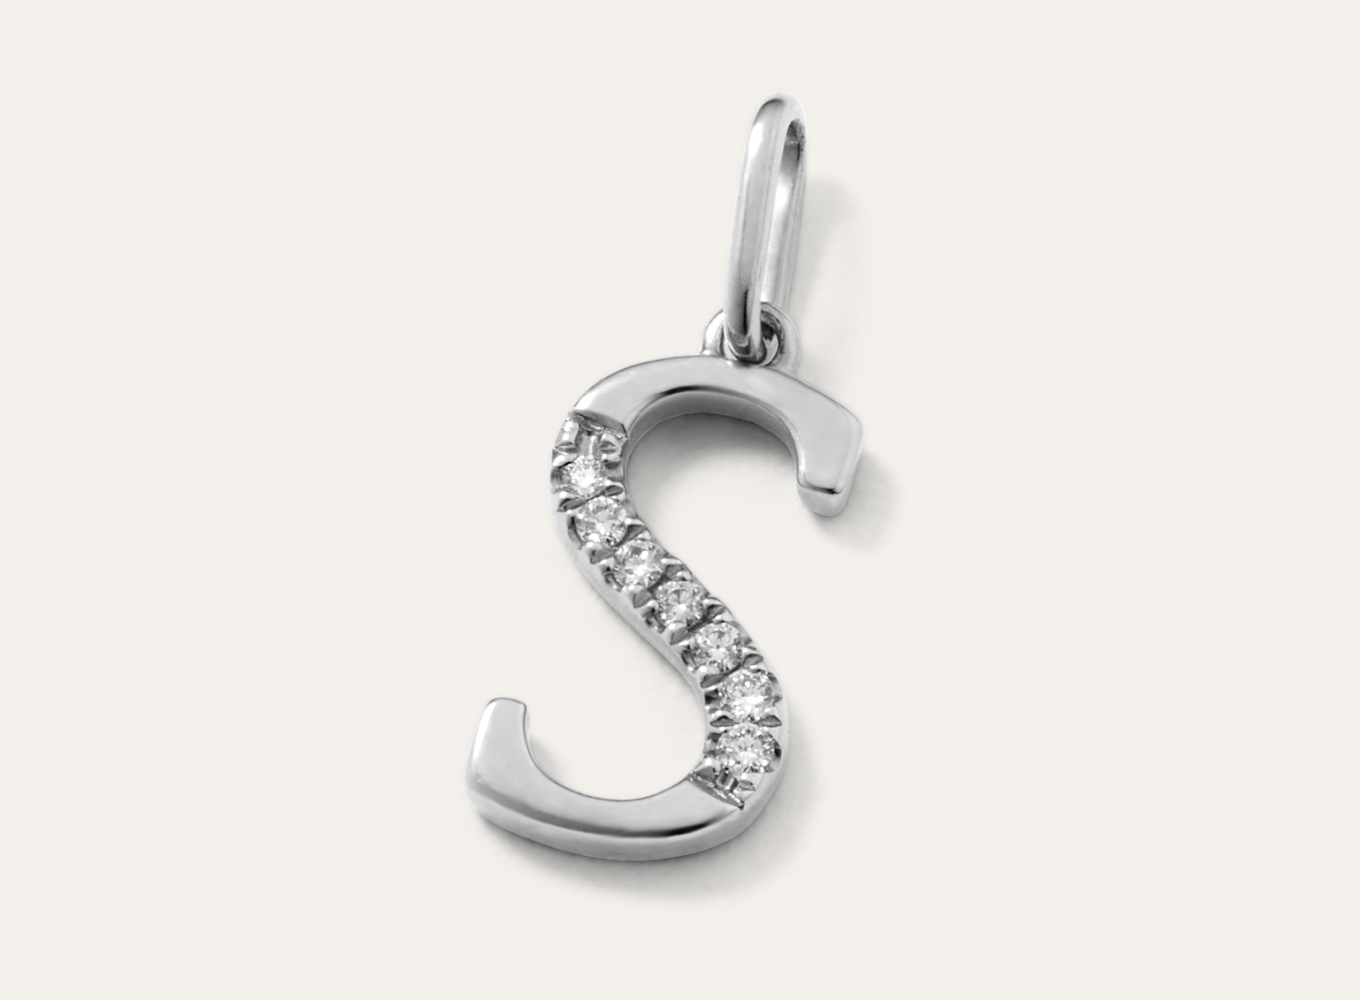 Diamond Accent Letter S Charm This letter S initial charm is crafted in bright 14-karat white gold and partially lined with natural diamond accents for a touch of sparkle. Add it to a chain to create a beautiful pendant, perfect for a gift or daily accessory.